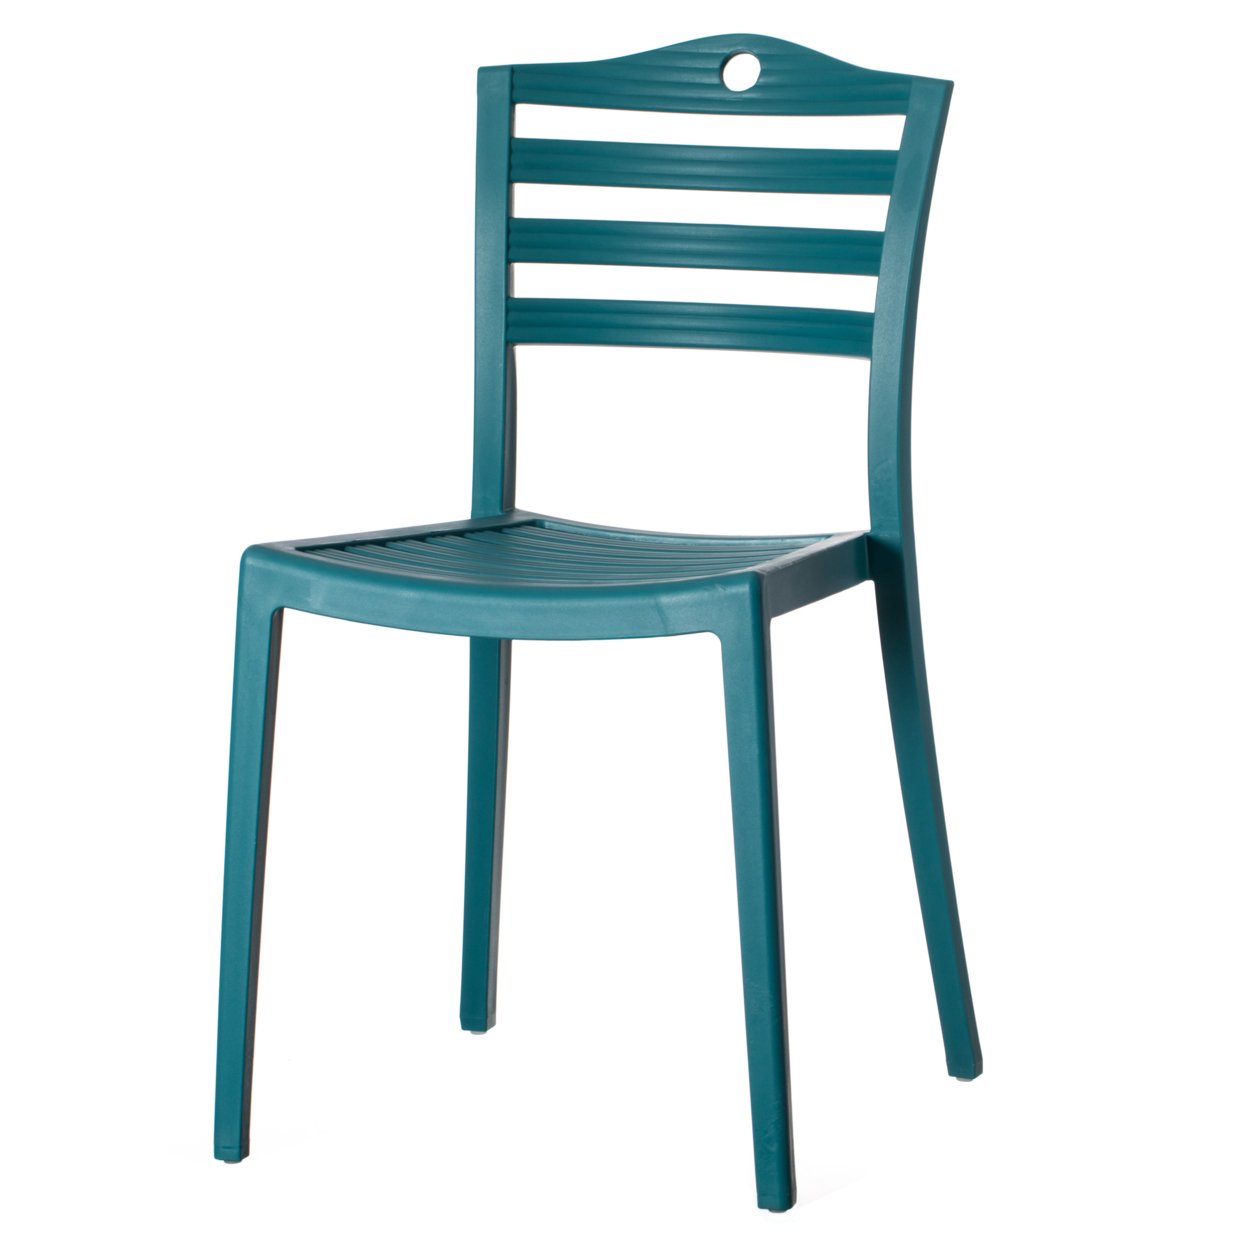 Stackable Modern Plastic Indoor And Outdoor Dining Chair With Ladderback Design For All Weather Use - Set Of 4 Blue